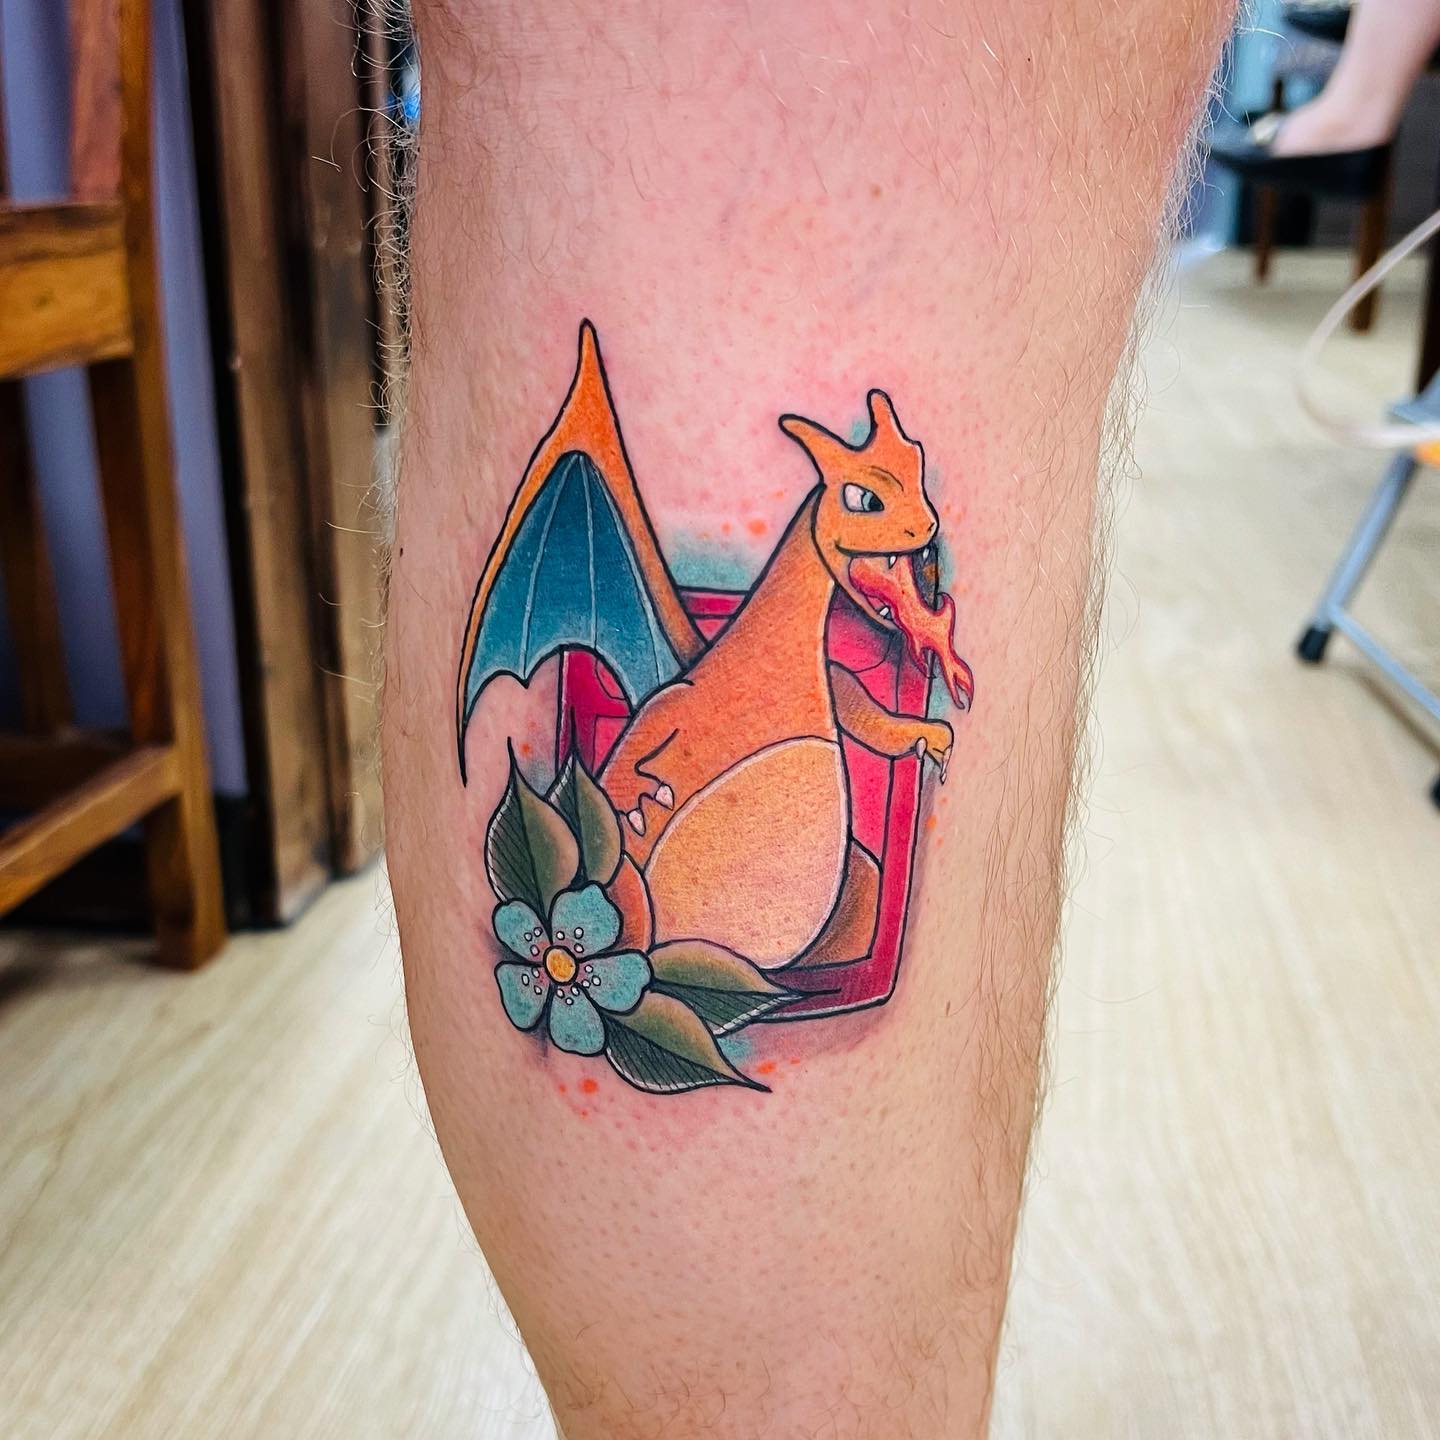 Charizard is a fire-flying Pokemon that evolves from Chameleon at level 36. This cute creature has the ability to shoot fireballs from its mouth. Getting a tattoo of it sounds like a great idea with its bright colors.